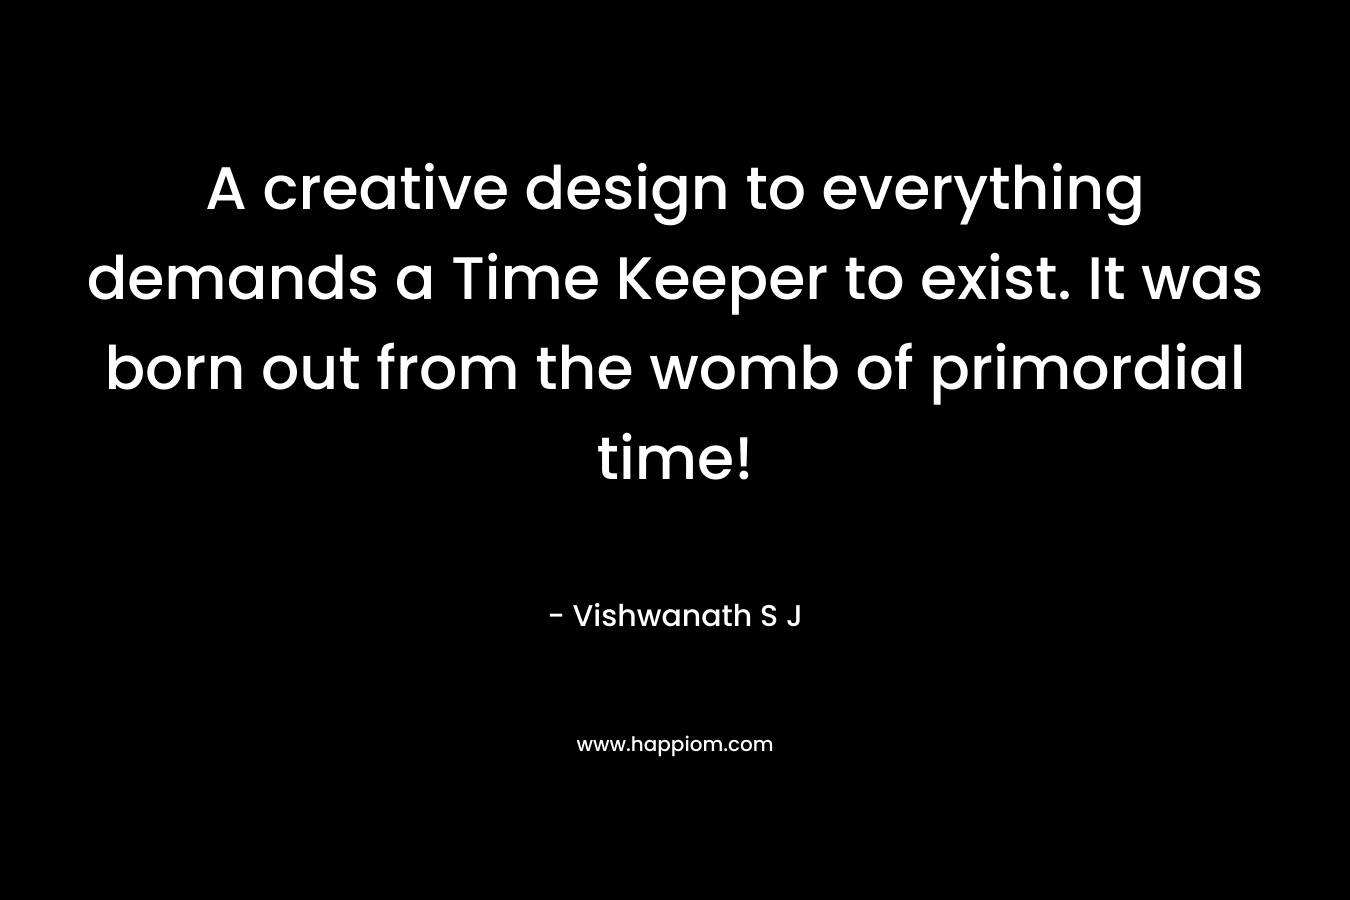 A creative design to everything demands a Time Keeper to exist. It was born out from the womb of primordial time!